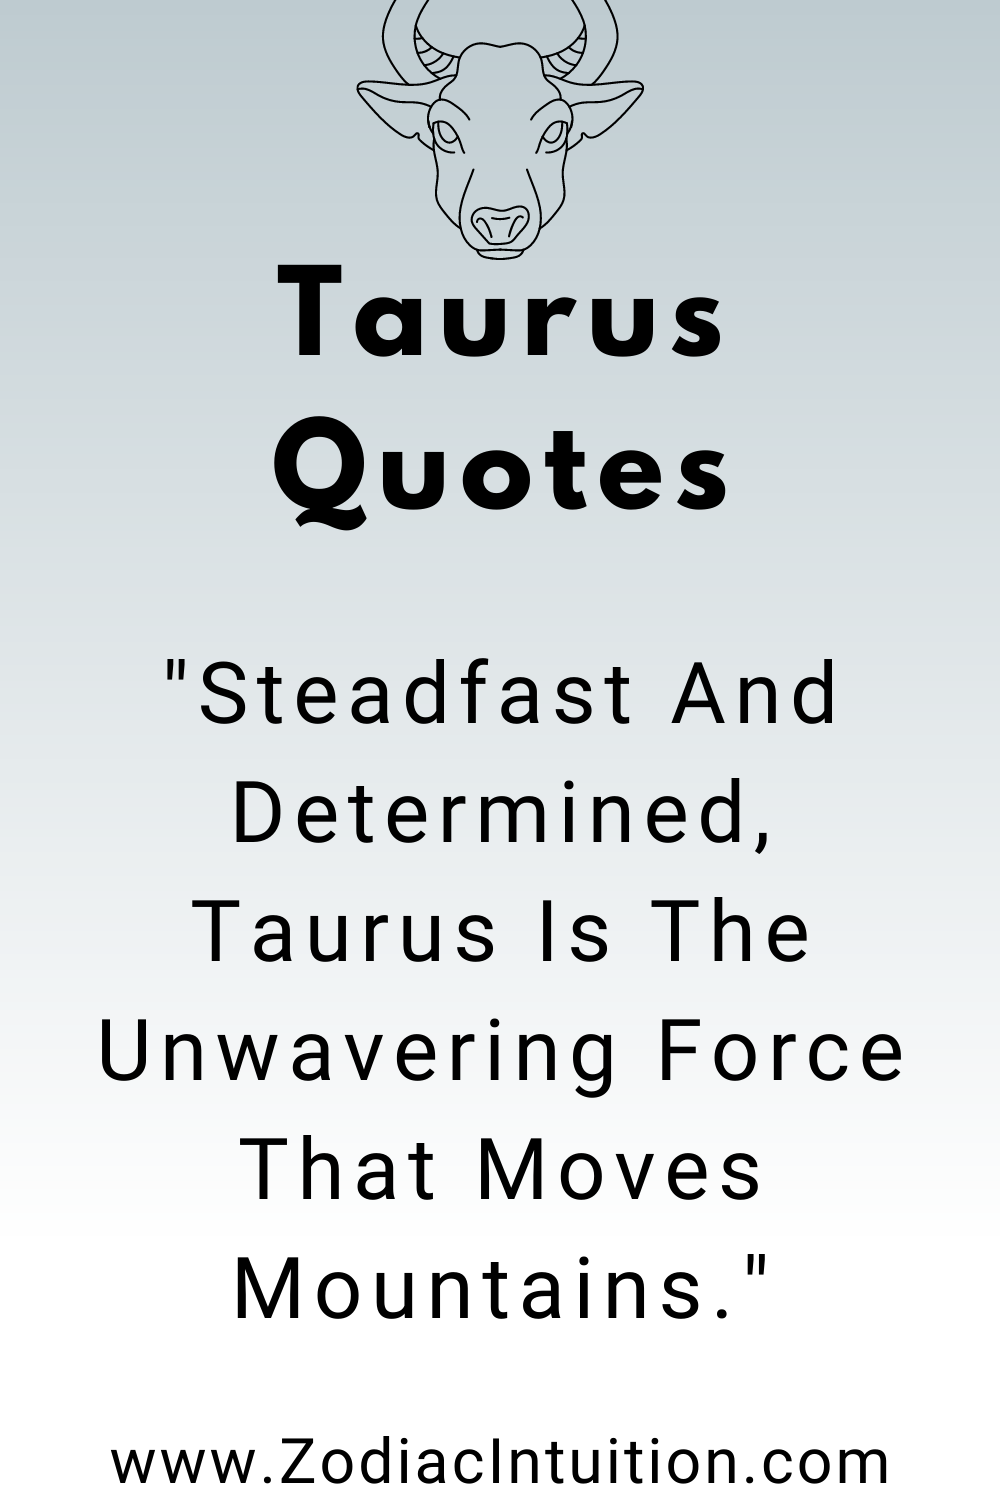 Top 5 Taurus Quotes And Inspiration